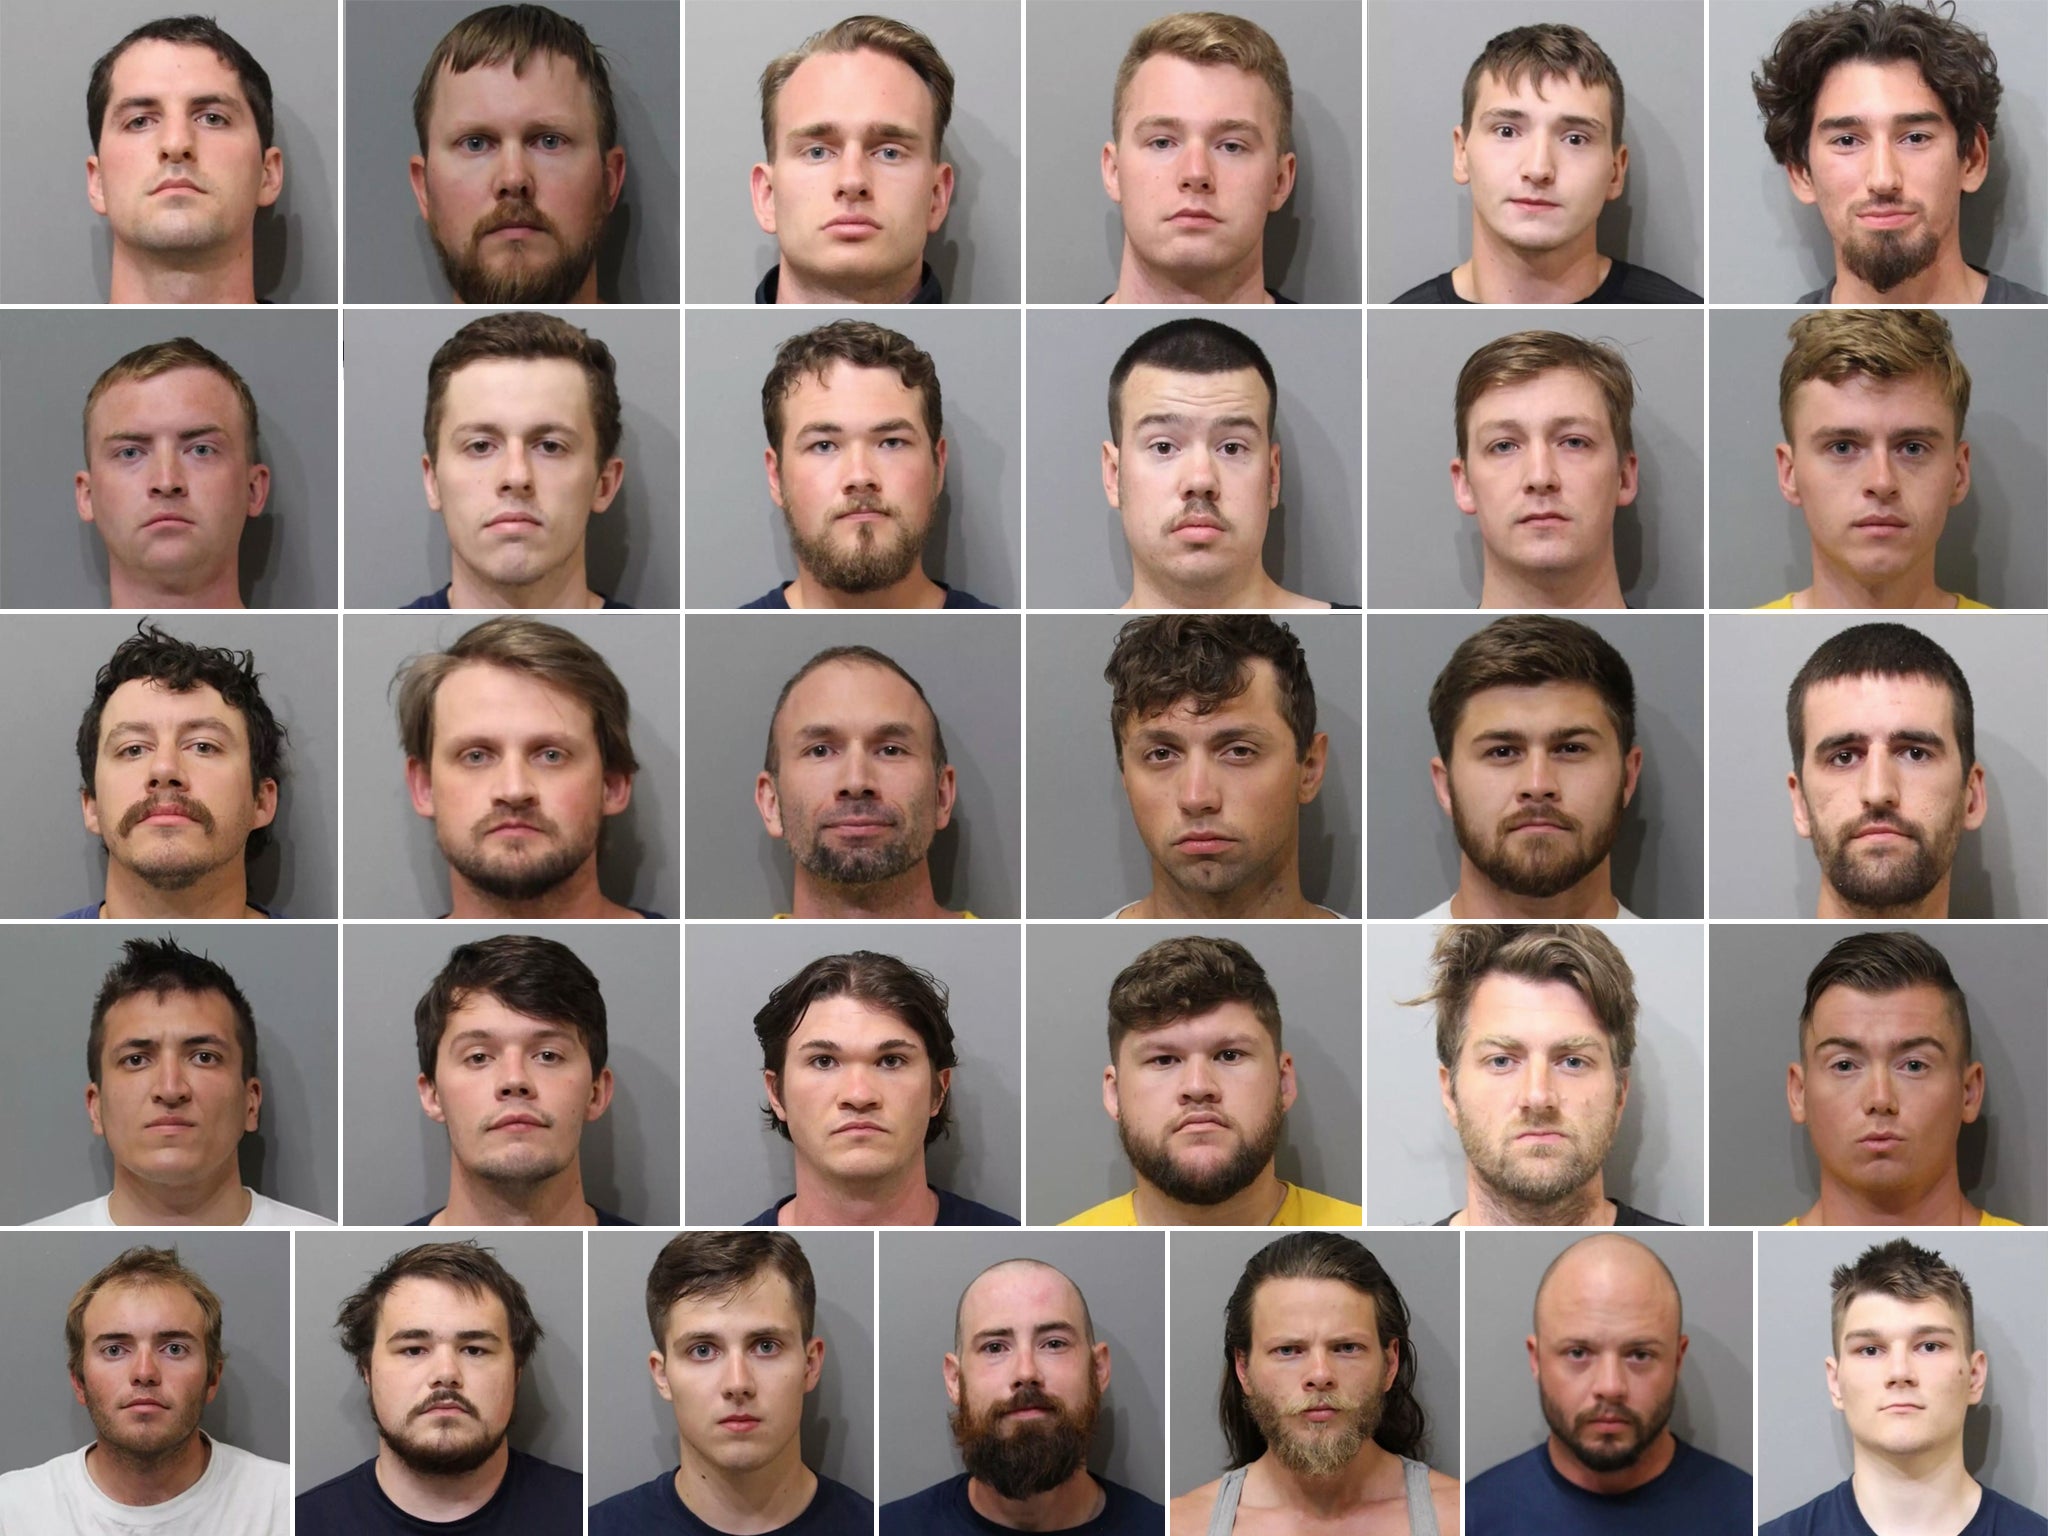 Thirty-one men were arrested for their suspicion to incite a riot. They are all allegedly members of the extremist group Patriot Front